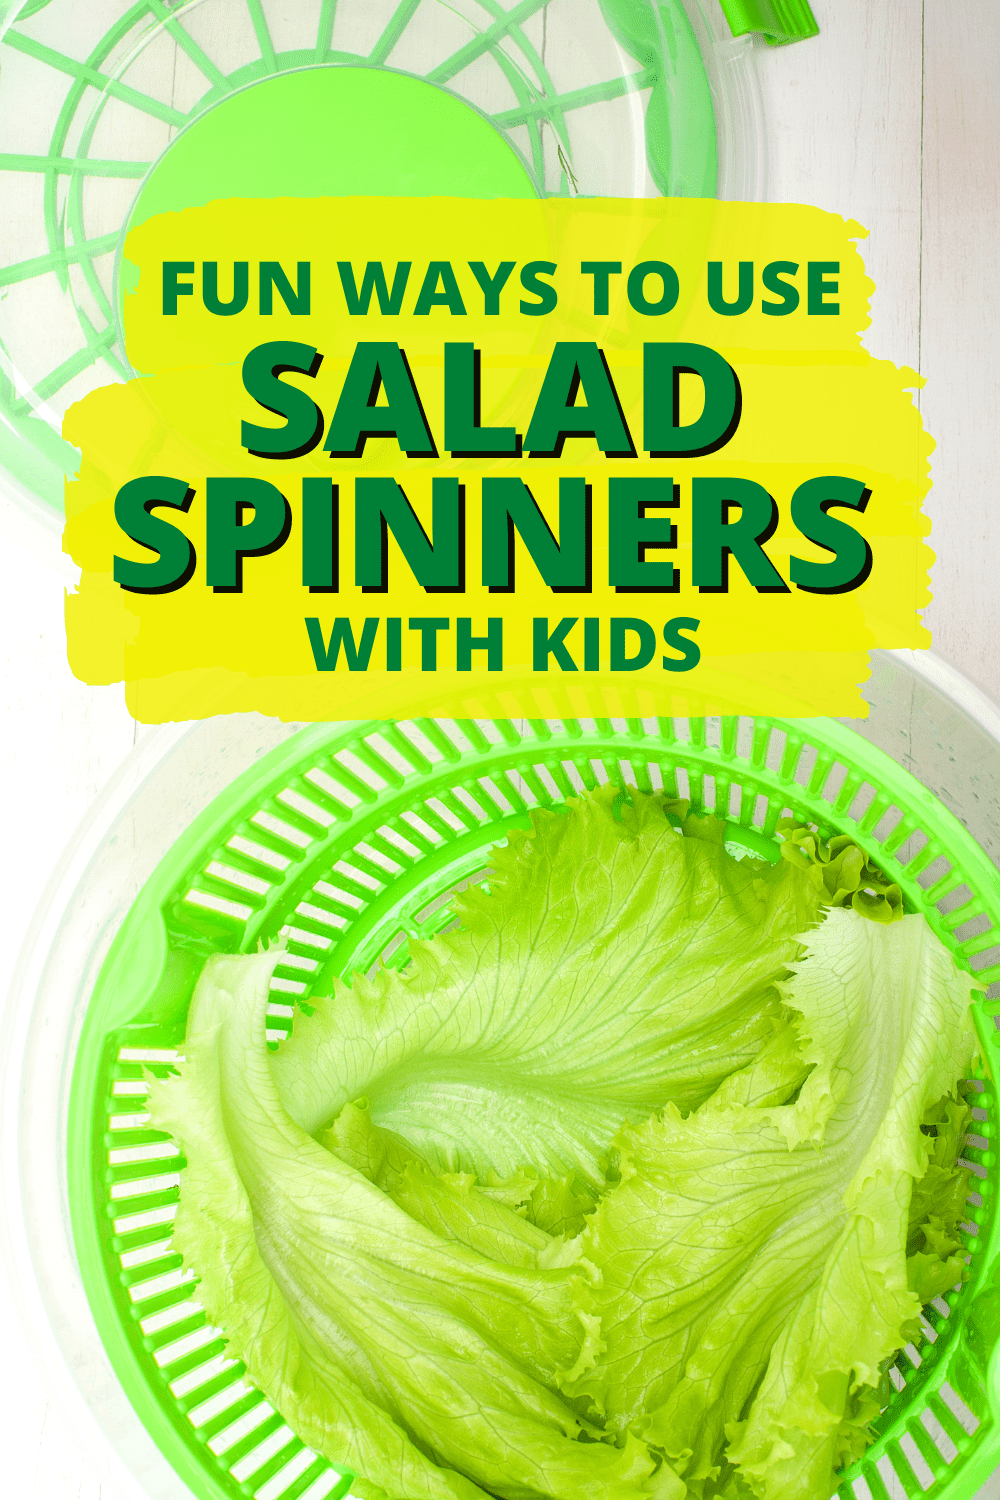 SURPRISING SALAD SPINNER USES AND BEST SALAD SPINNERS FOR HOME text on top of salad spinner with green lettuce sitting on table